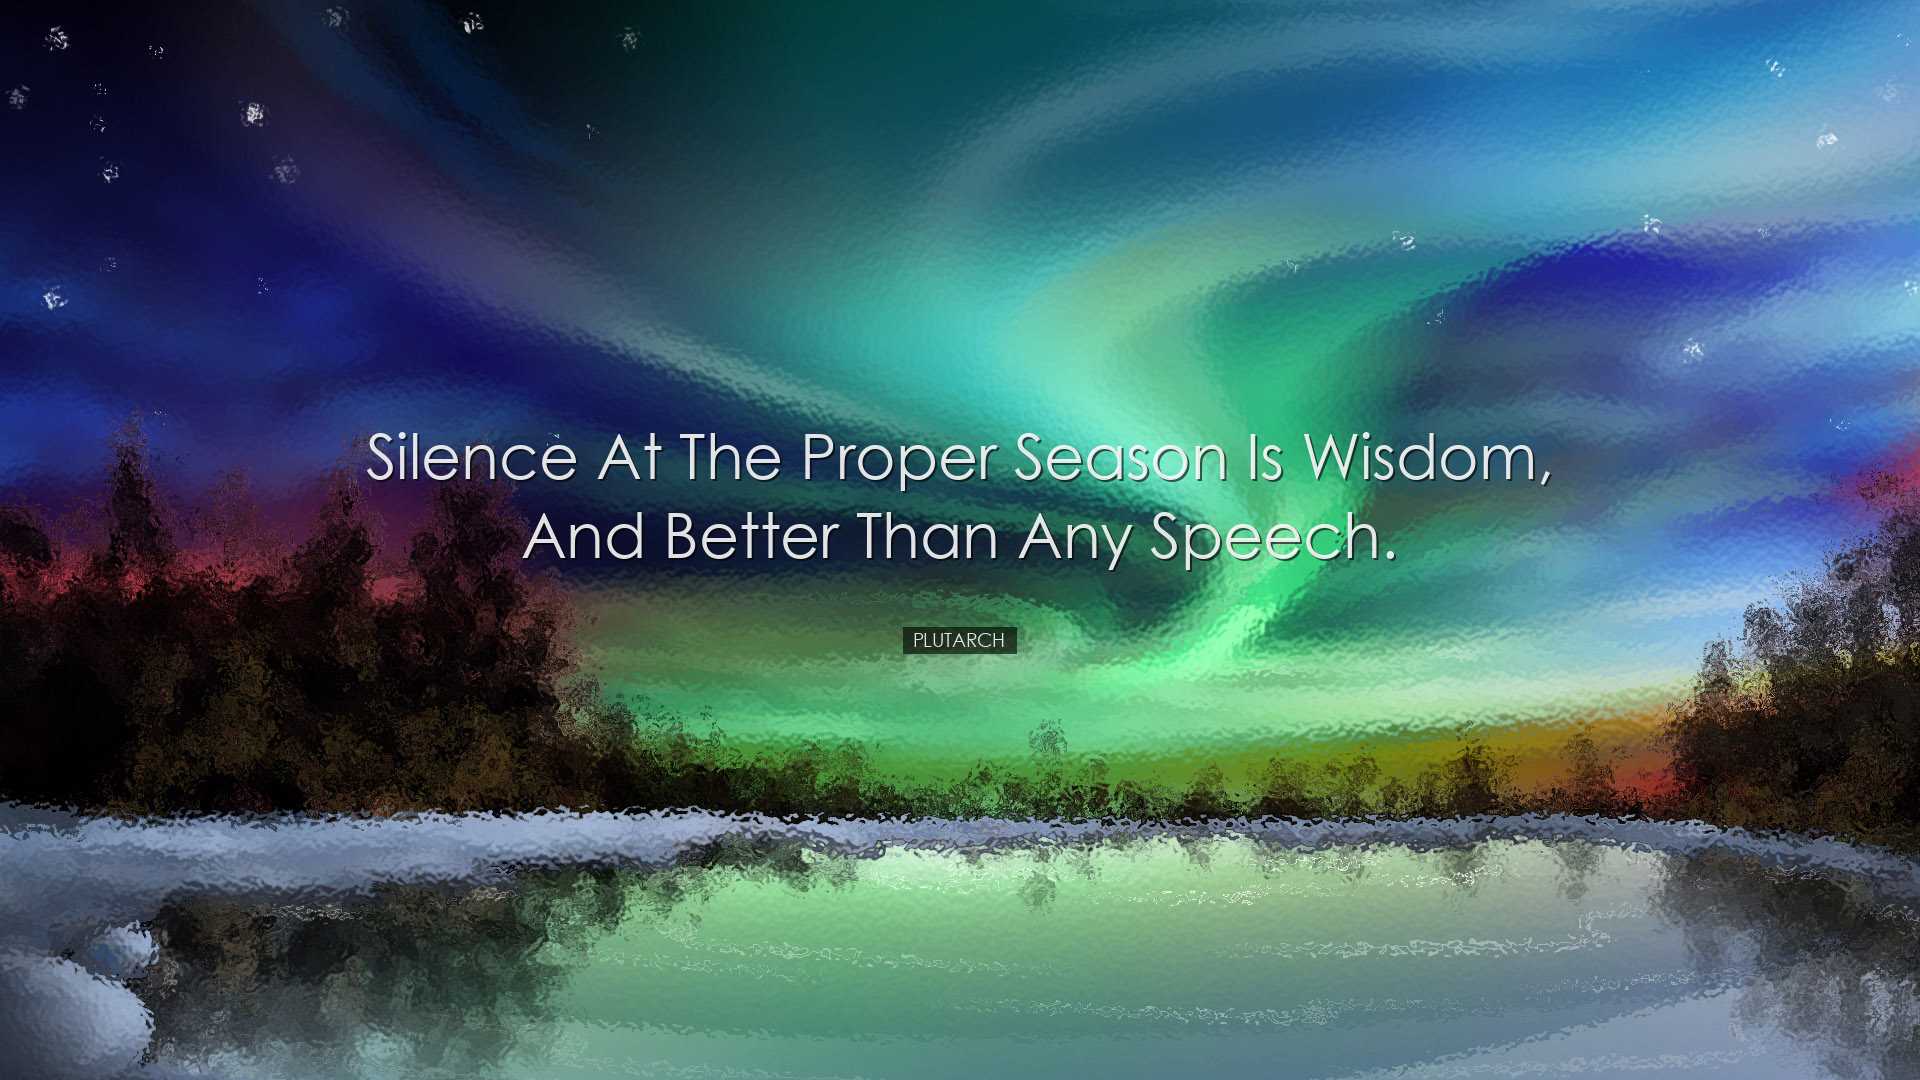 Silence at the proper season is wisdom, and better than any speech